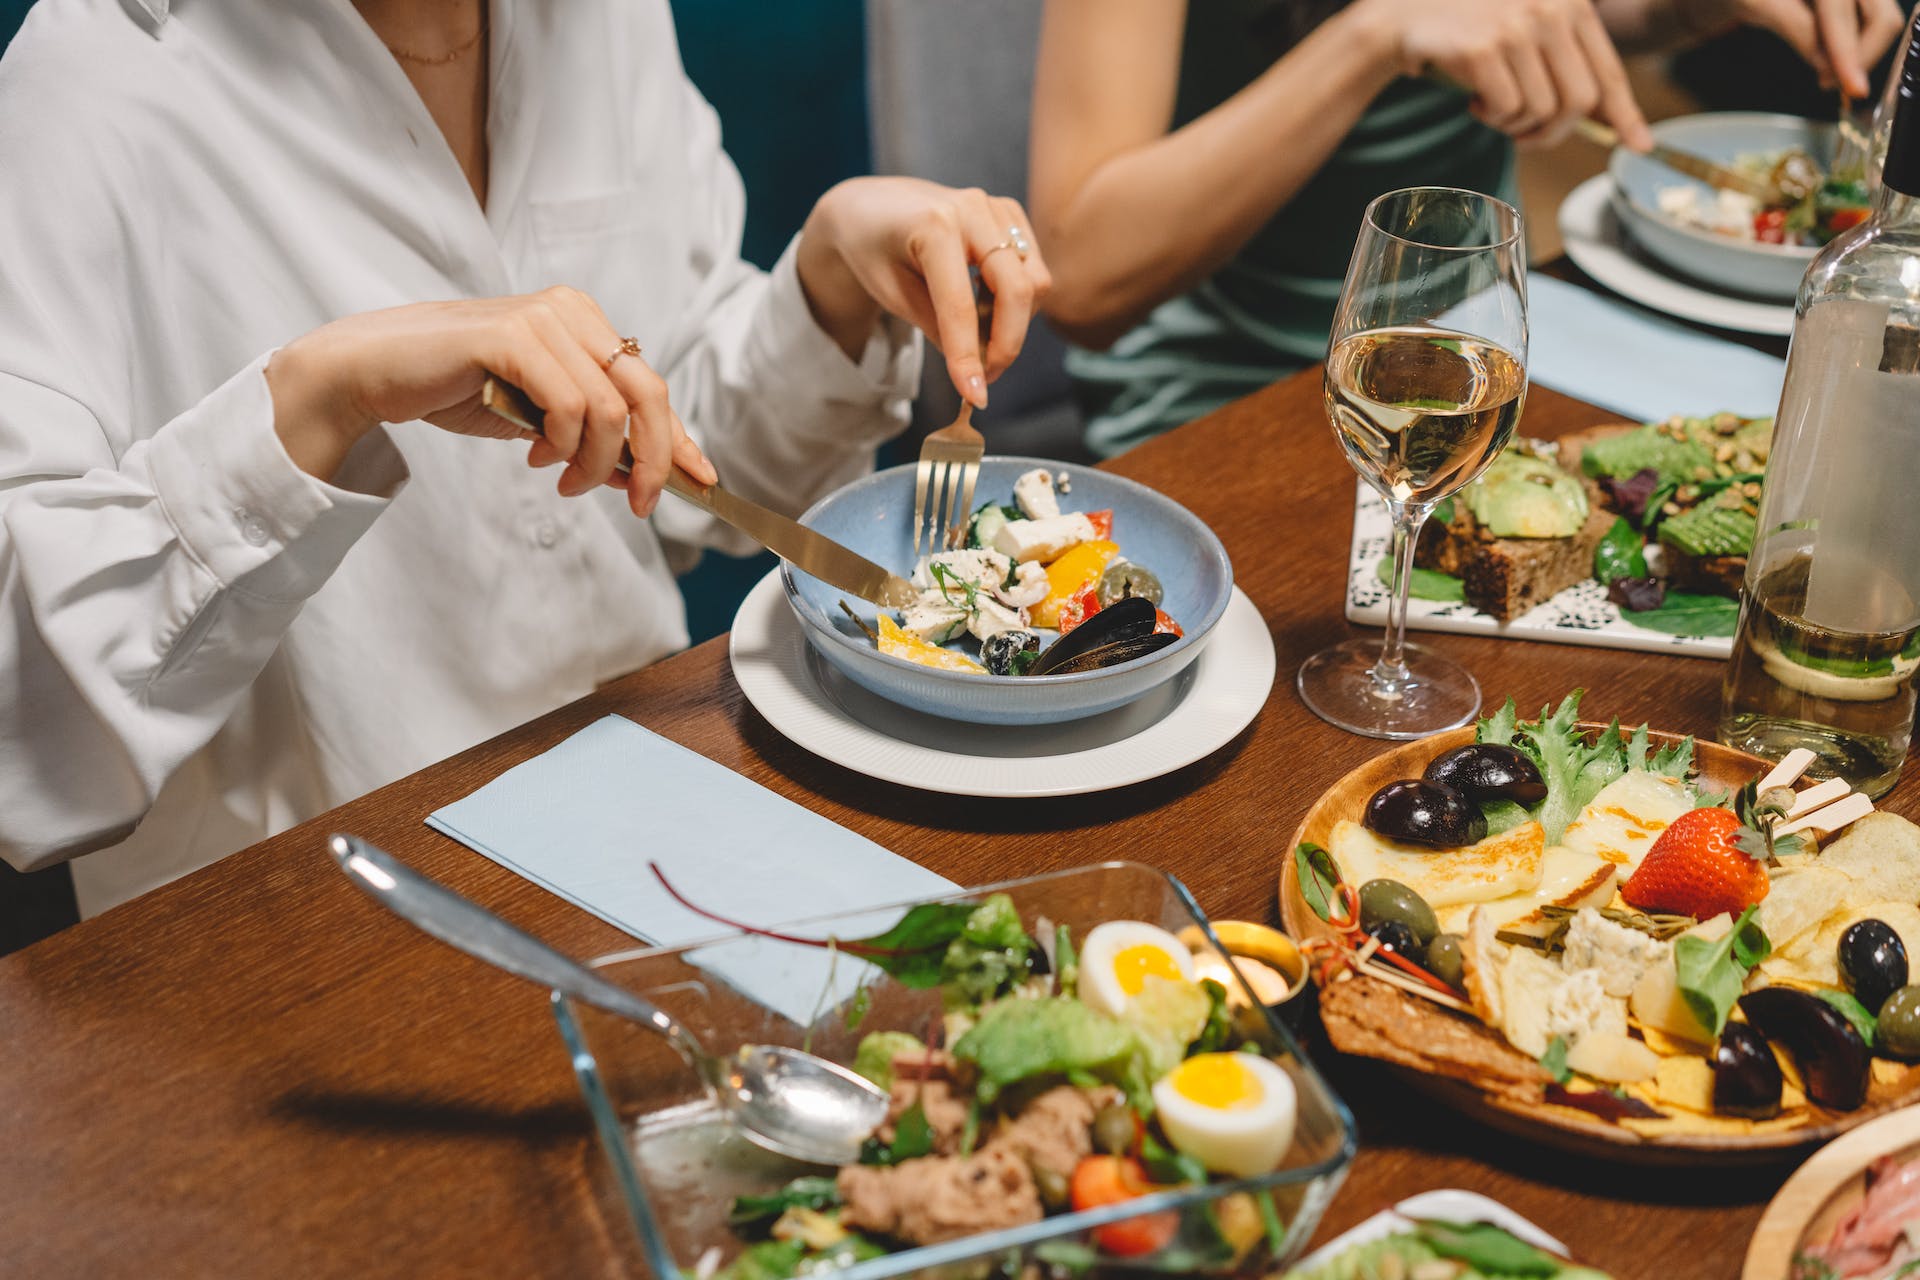 People eating around a table | Source: Pexels